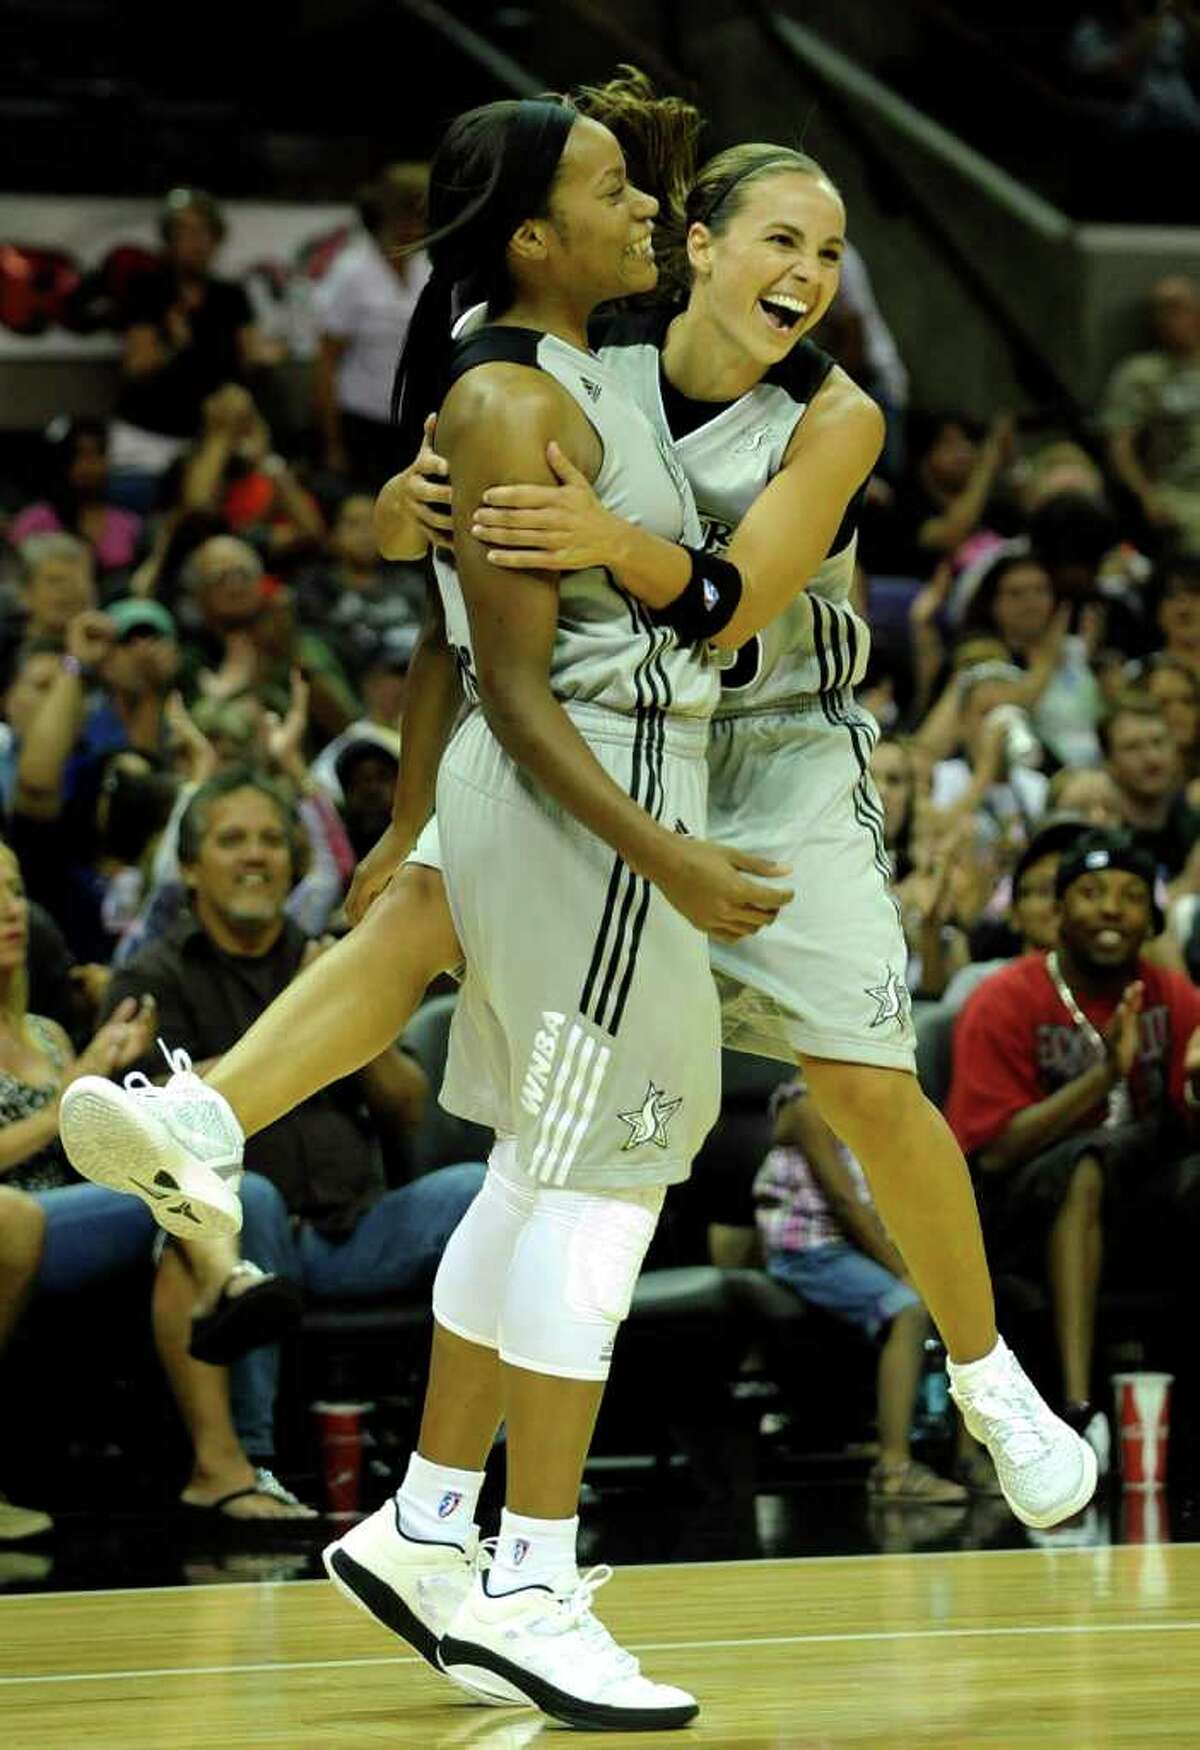 Guard Becky Hammon (right), rejoicing after a basket by Jia Perkins on Saturday against Seattle, says the Silver Stars need to take care of business to make the playoffs.